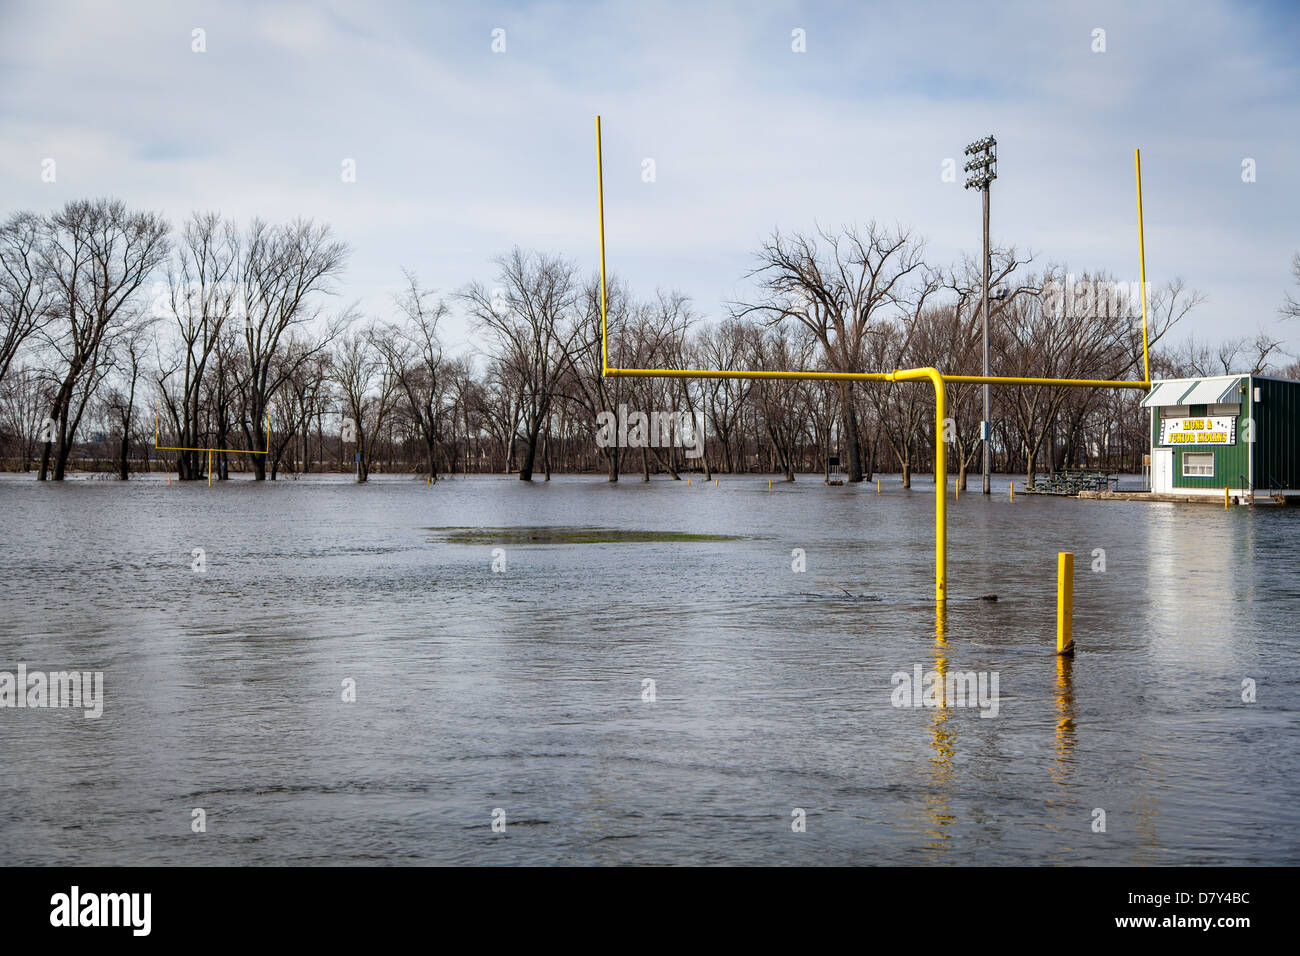 Rock River overflows and floods a football field Stock Photo